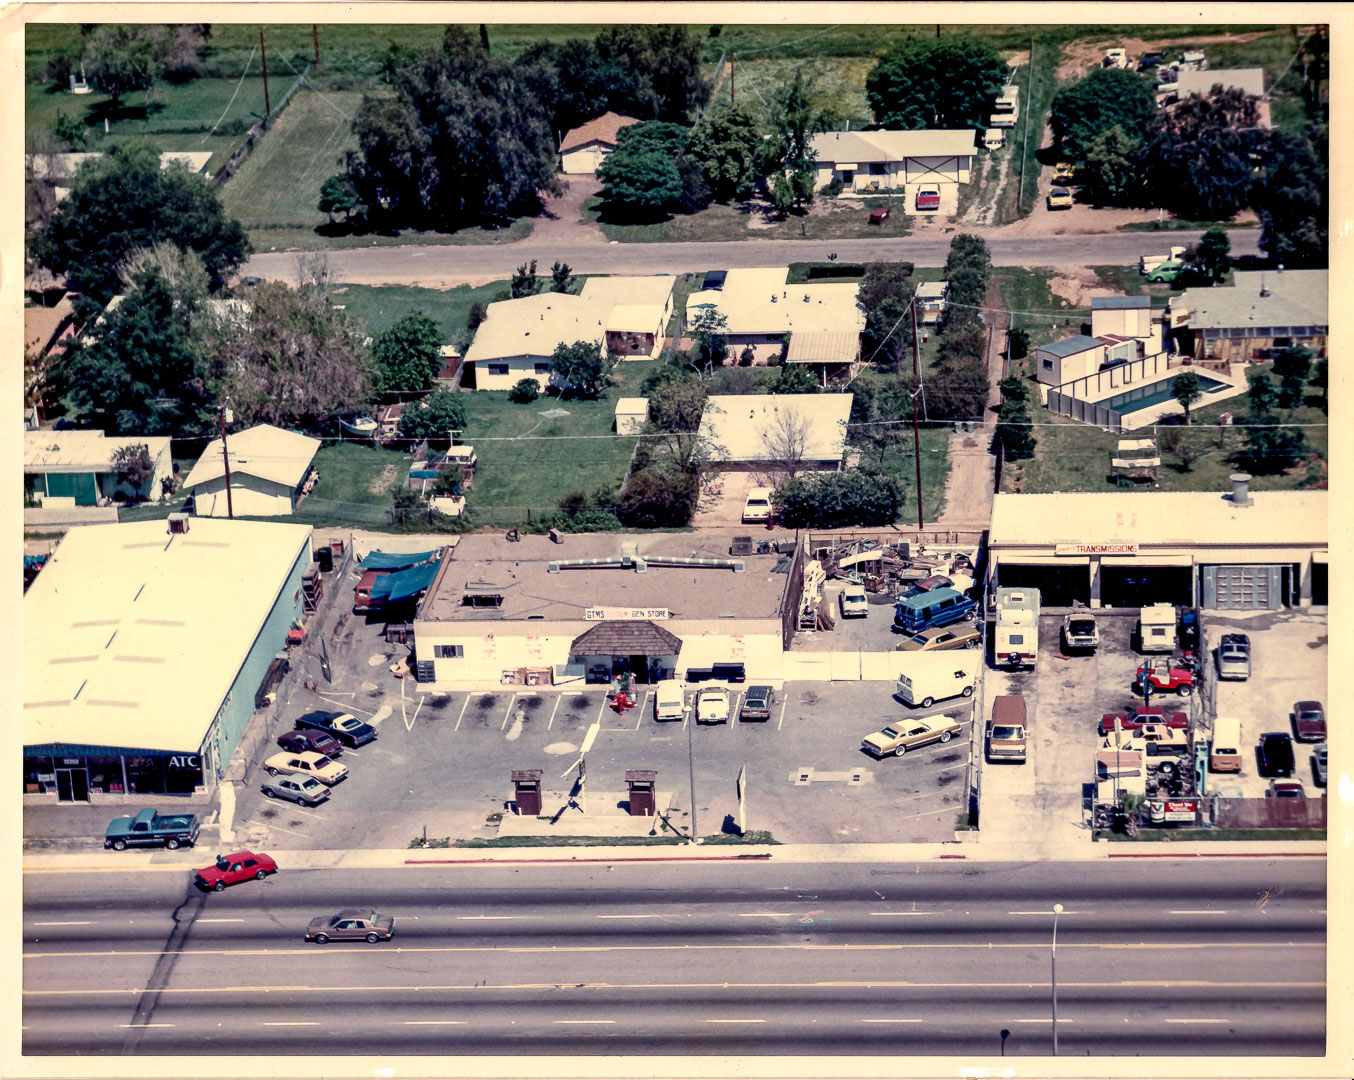 first santee gtm store on east mission gorge 1983-1989 - GTM Discount  General Stores